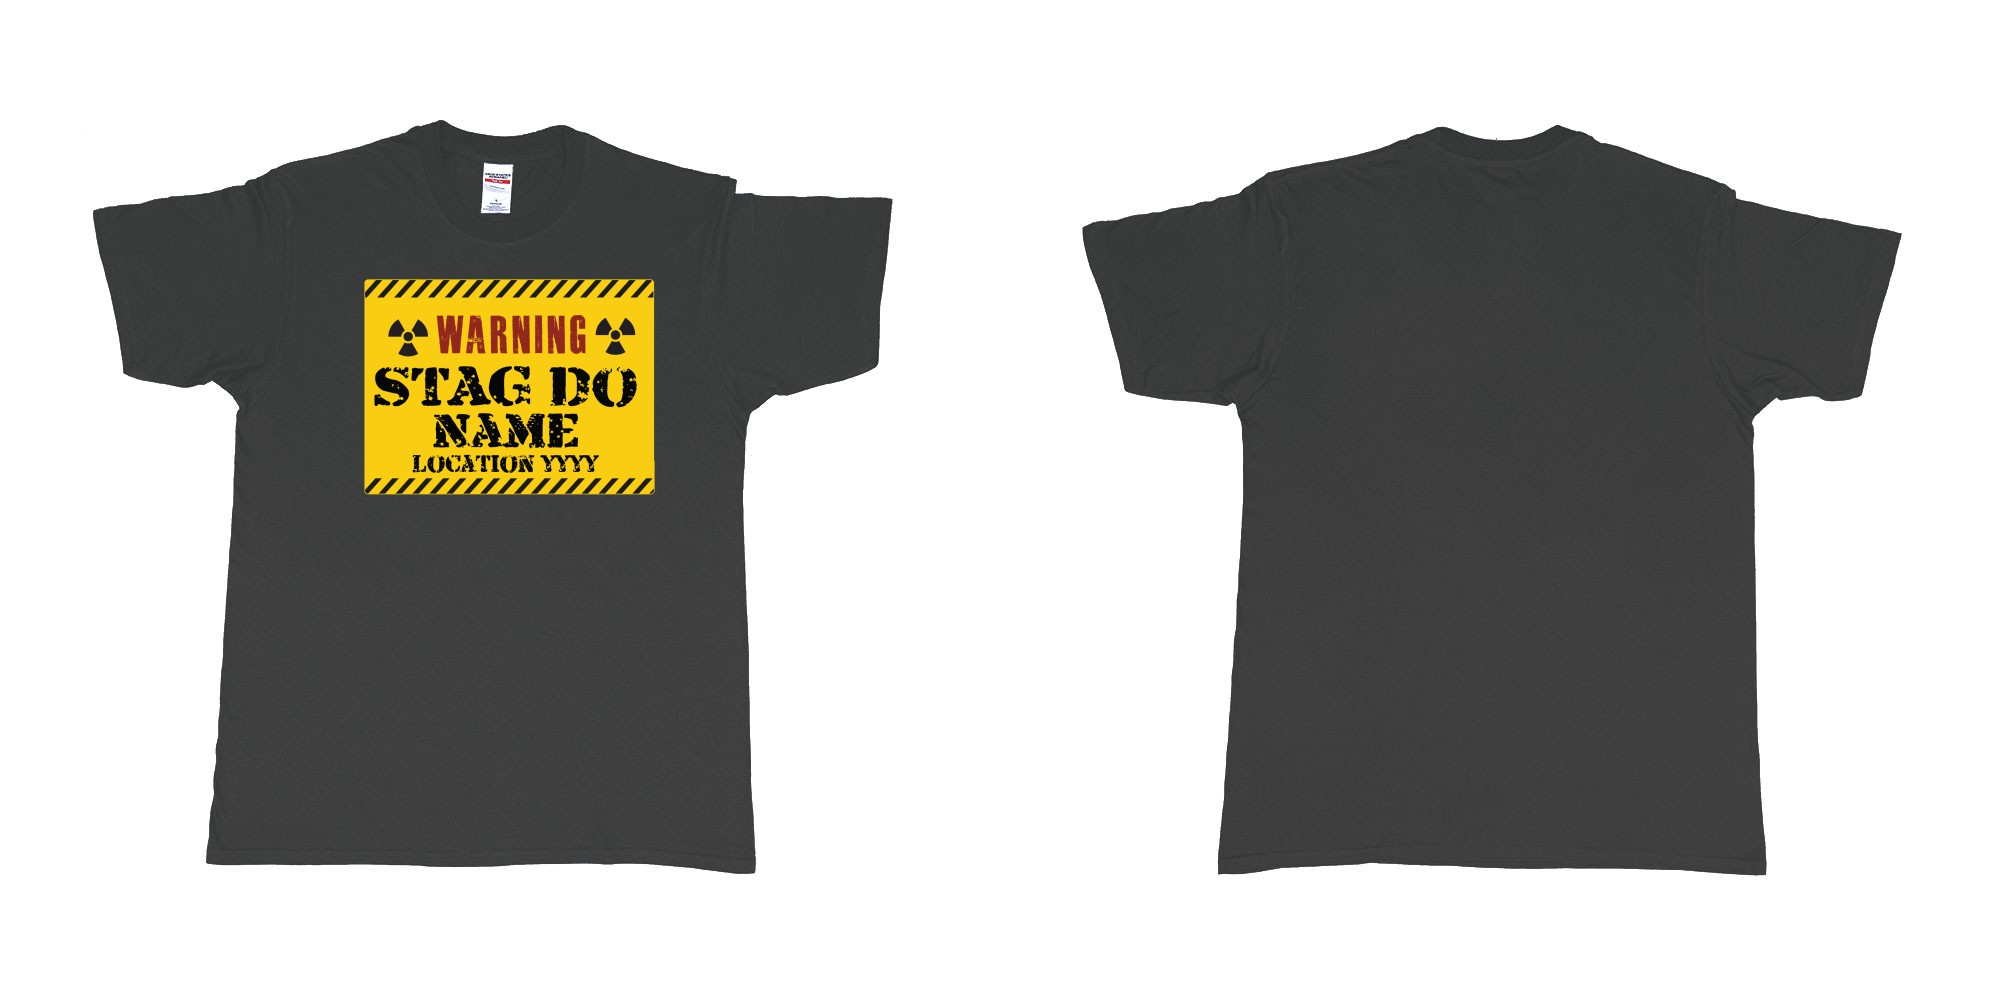 Custom tshirt design Warning Stag Do Location in fabric color black choice your own text made in Bali by The Pirate Way